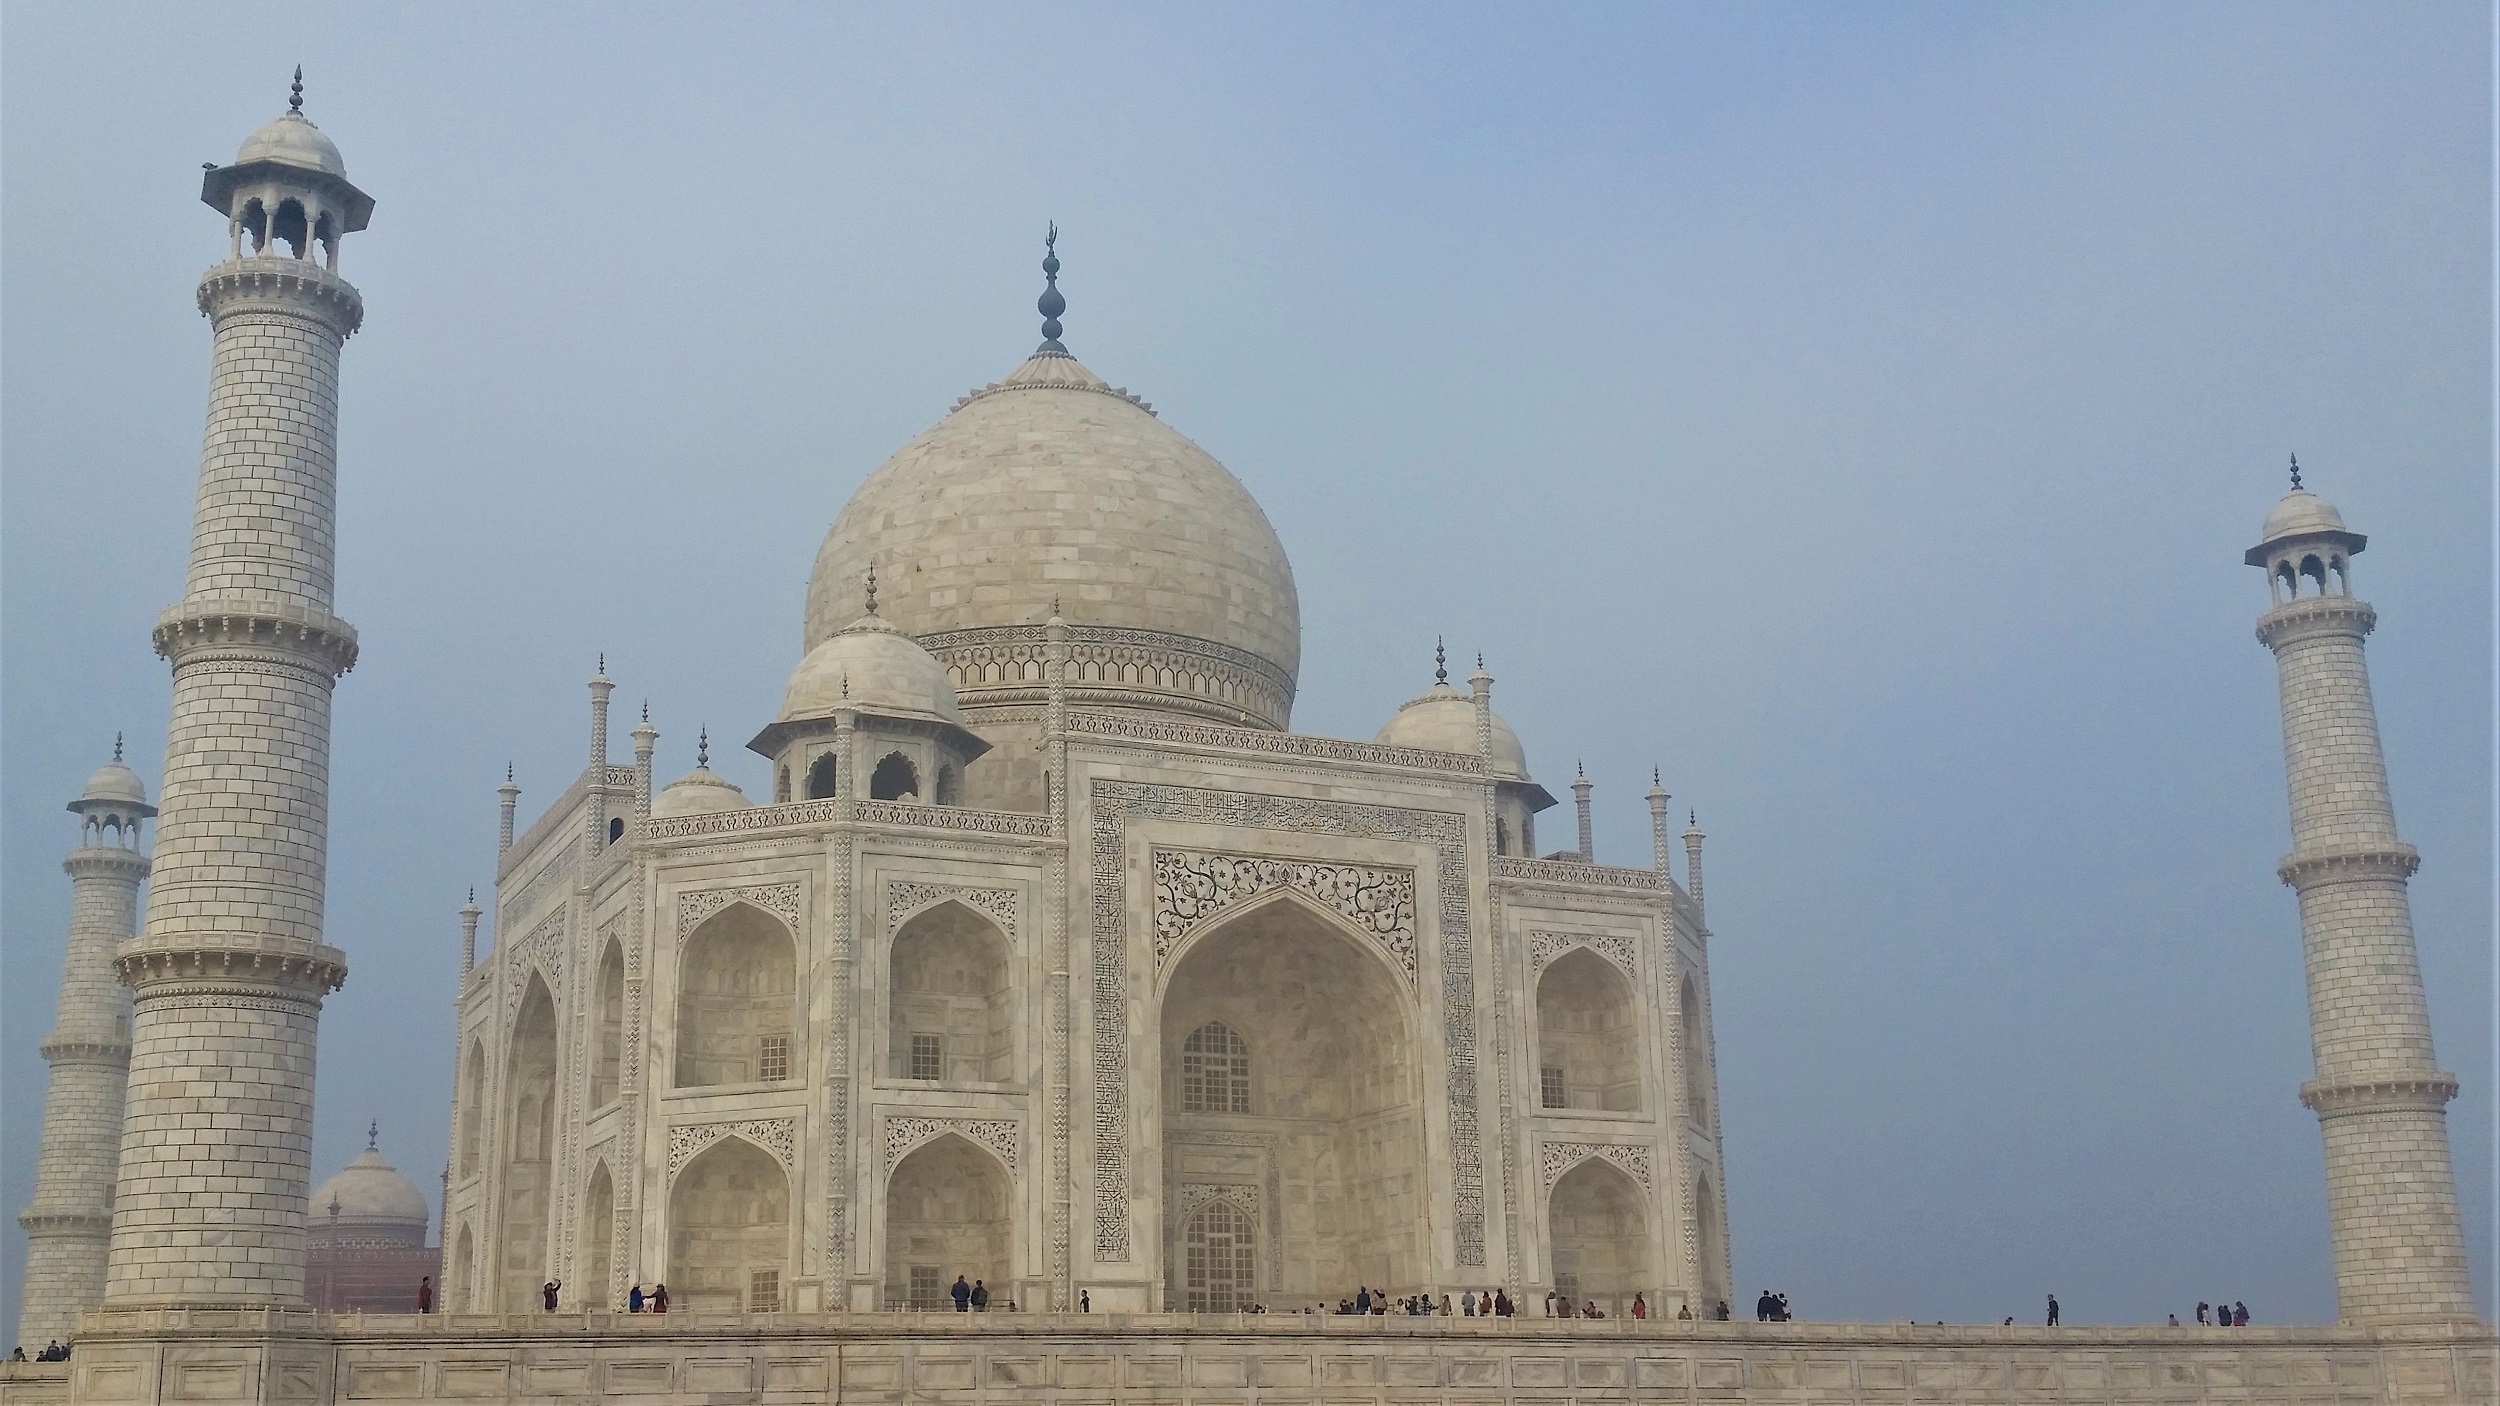 Taj Mahal from close with all of its details on the marble